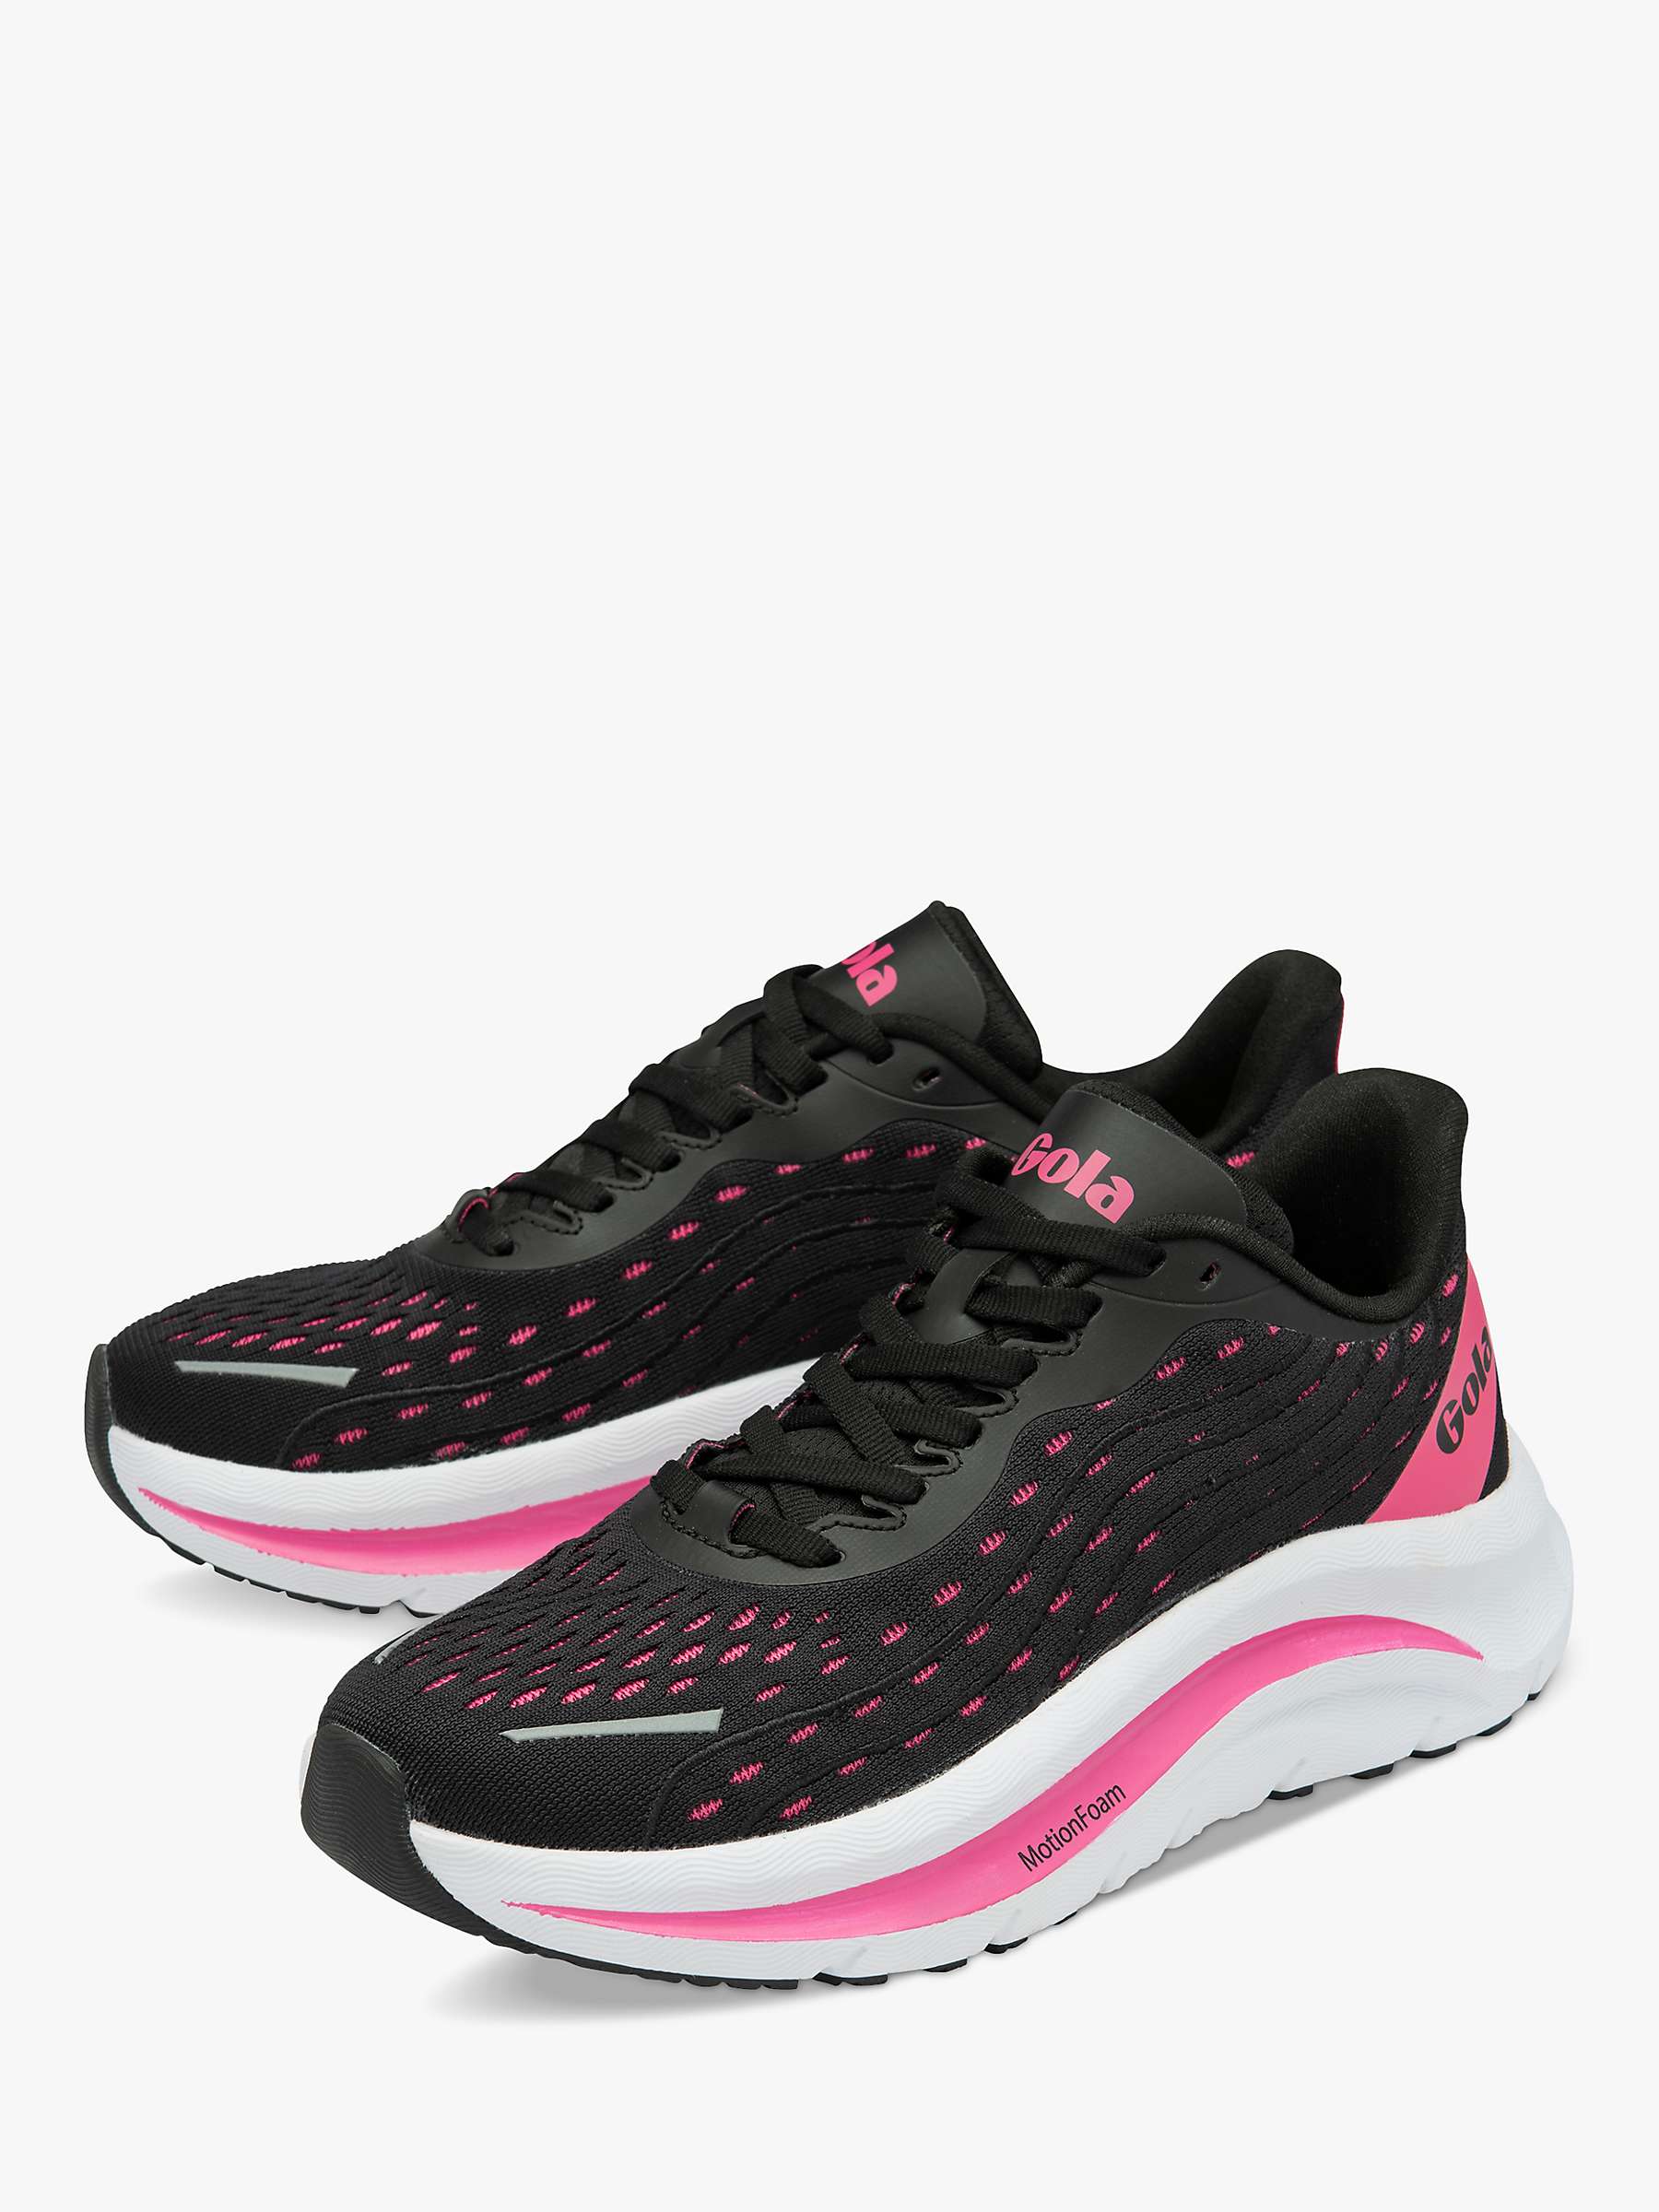 Buy Gola Performance Alzir Speed Running Trainers Online at johnlewis.com